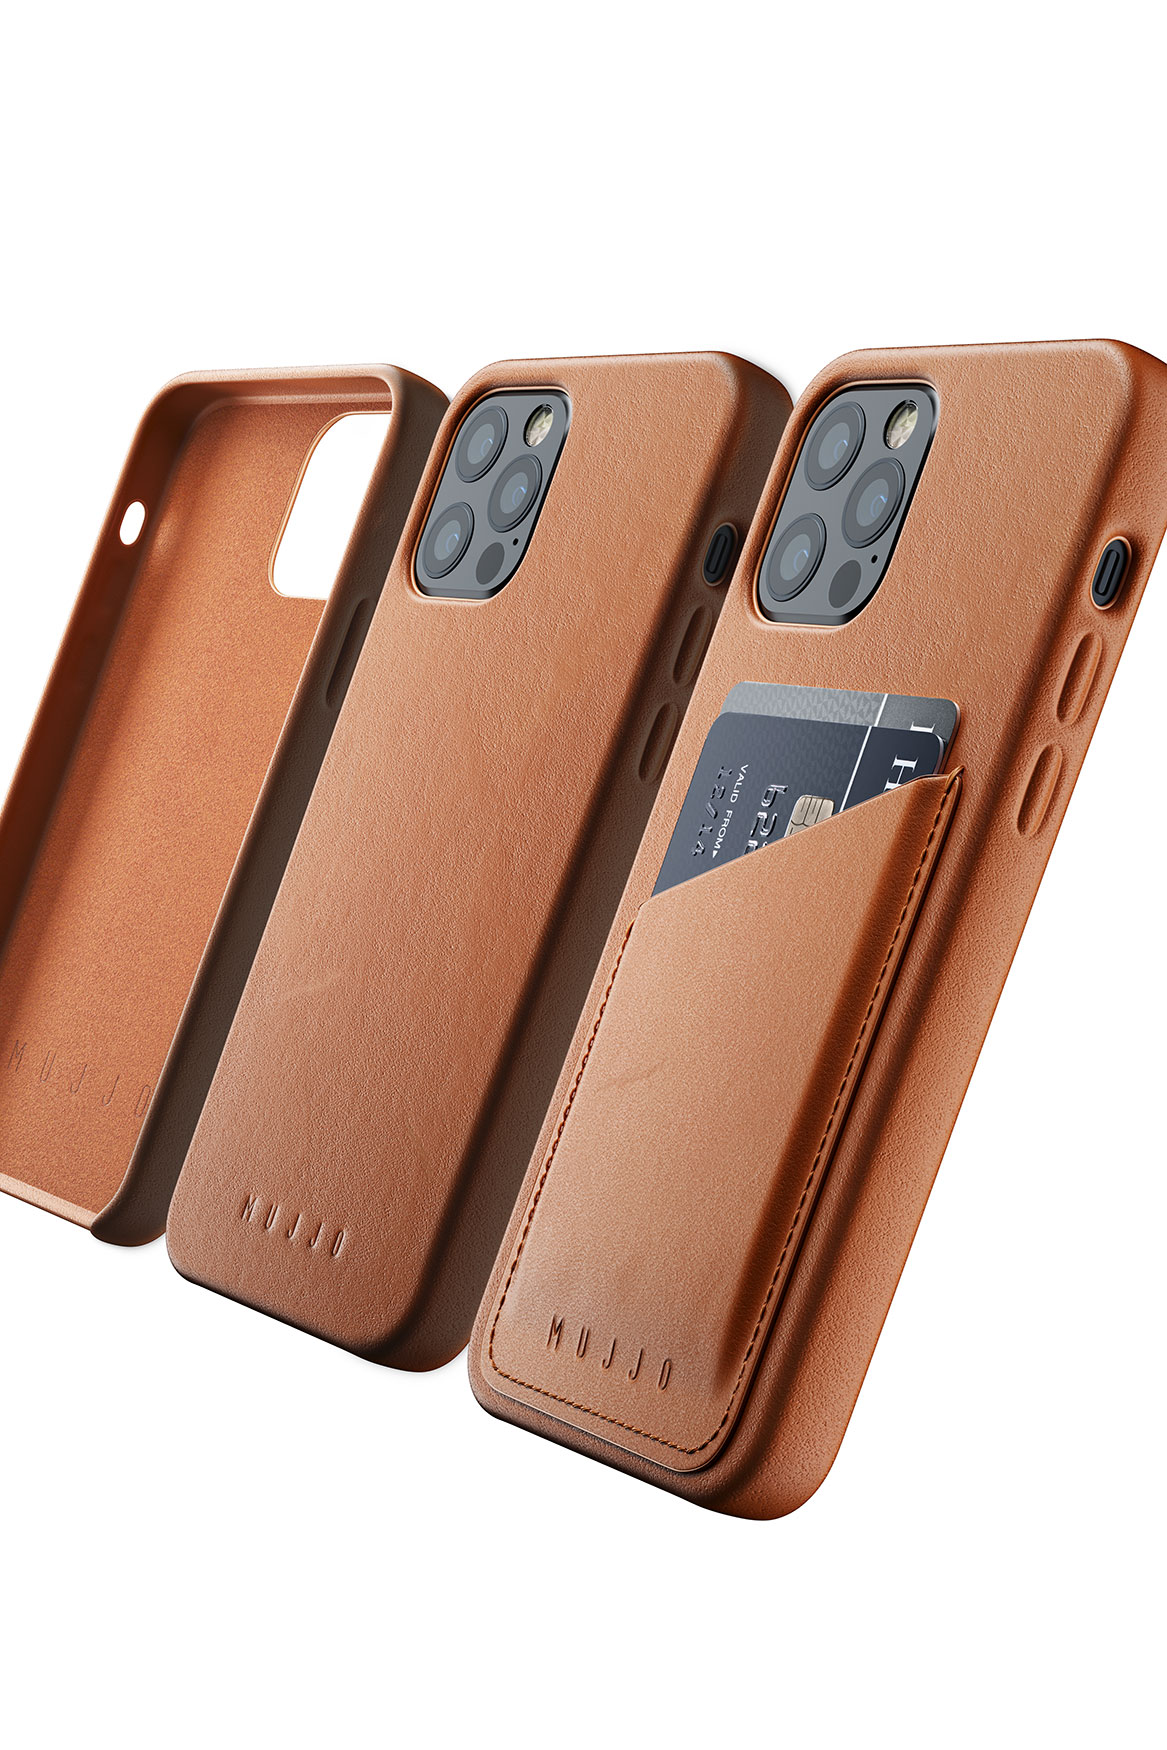 Mujjo Unveils New Leather Cases for iPhone 12